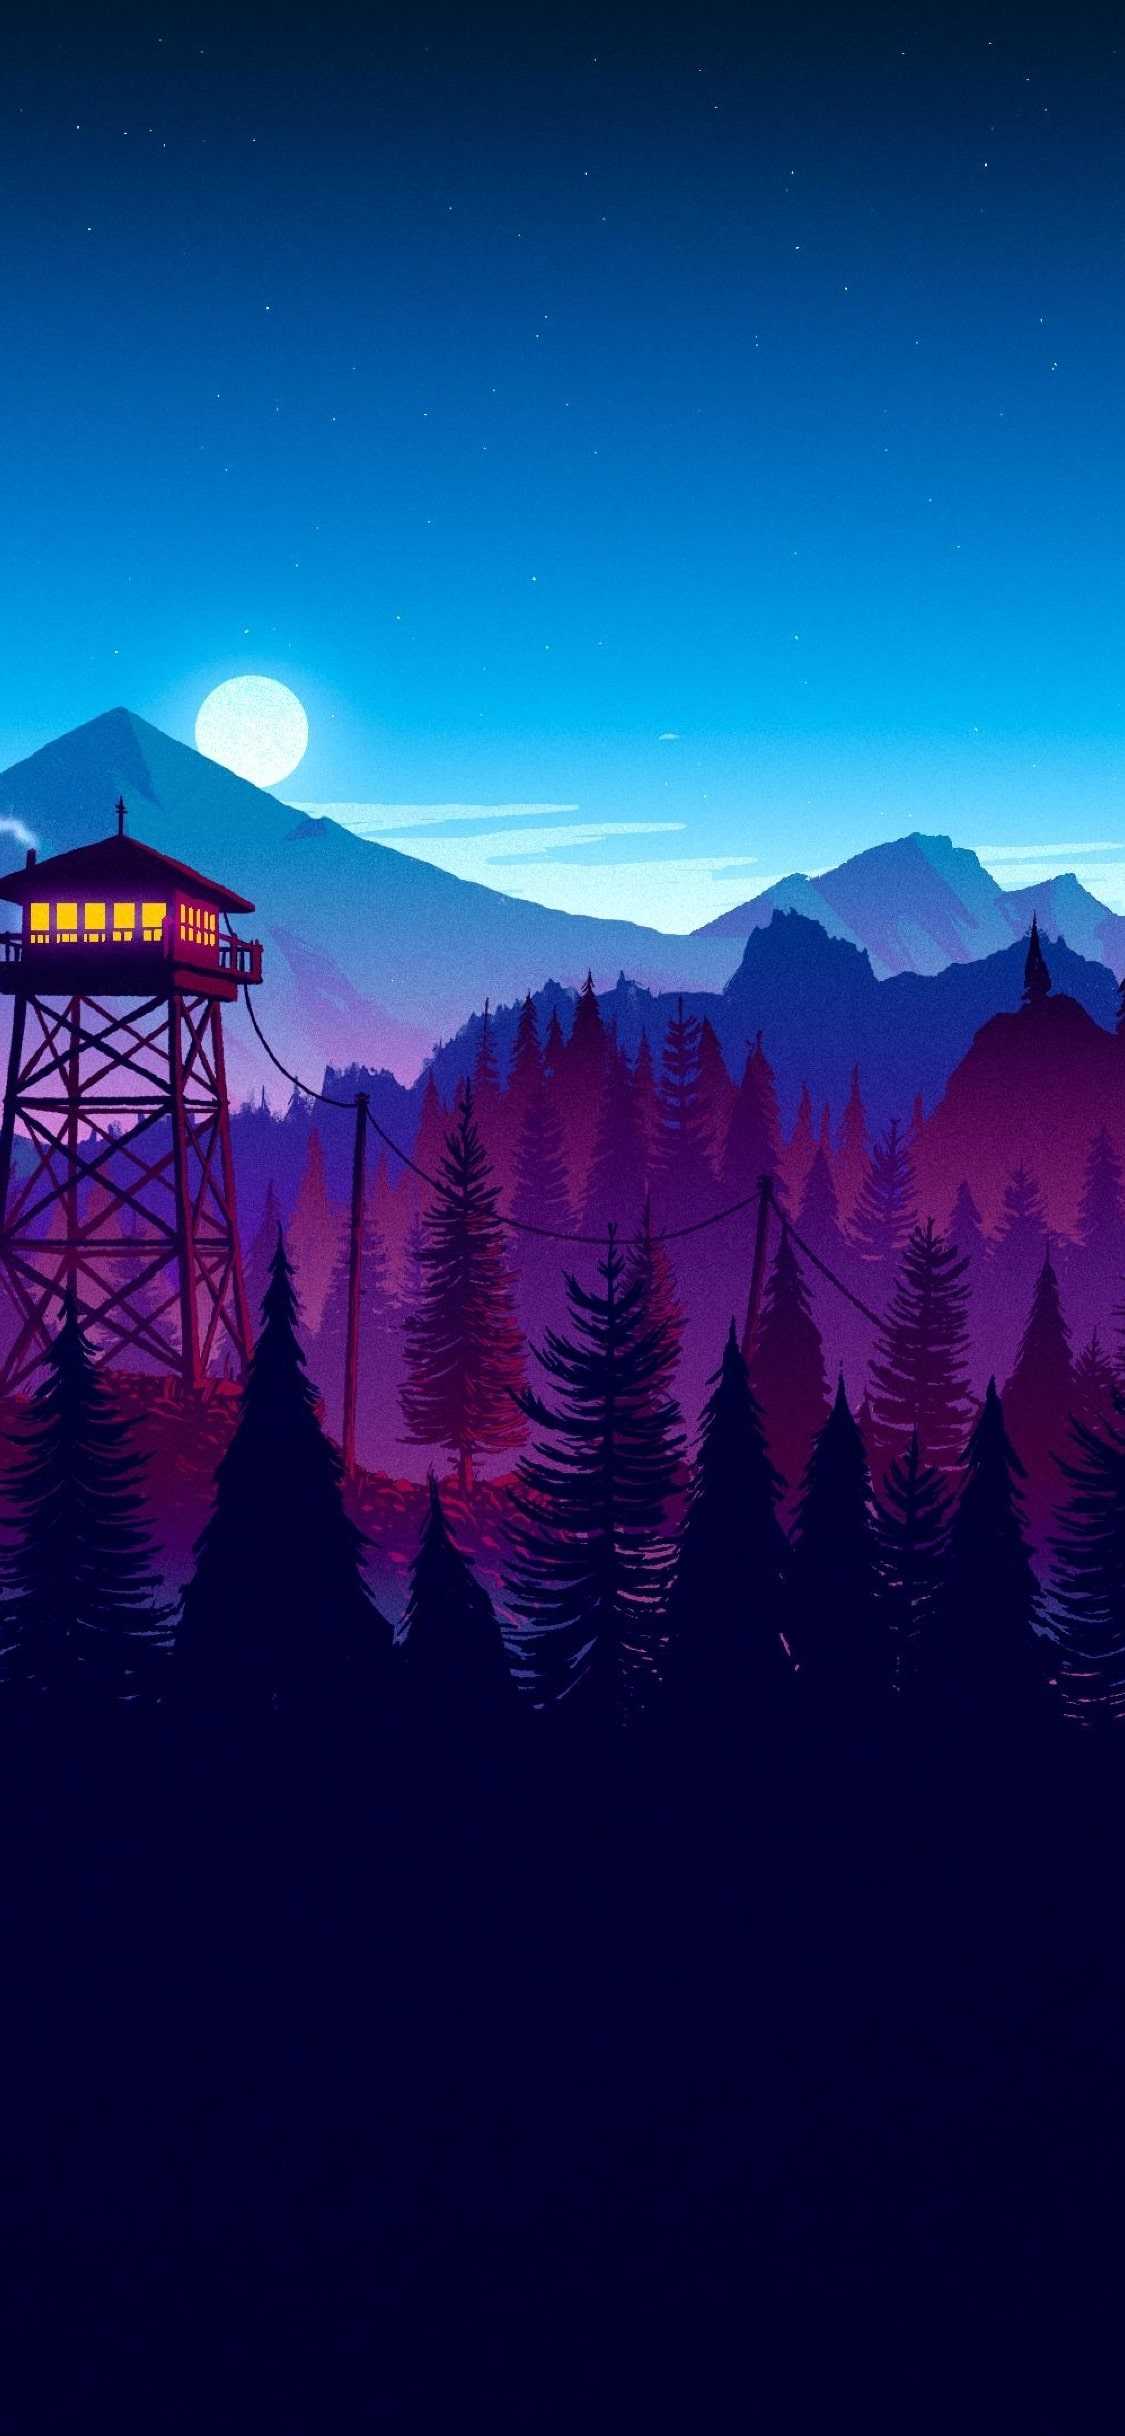 Firewatch Wallpapers - KoLPaPer - Awesome Free HD Wallpapers